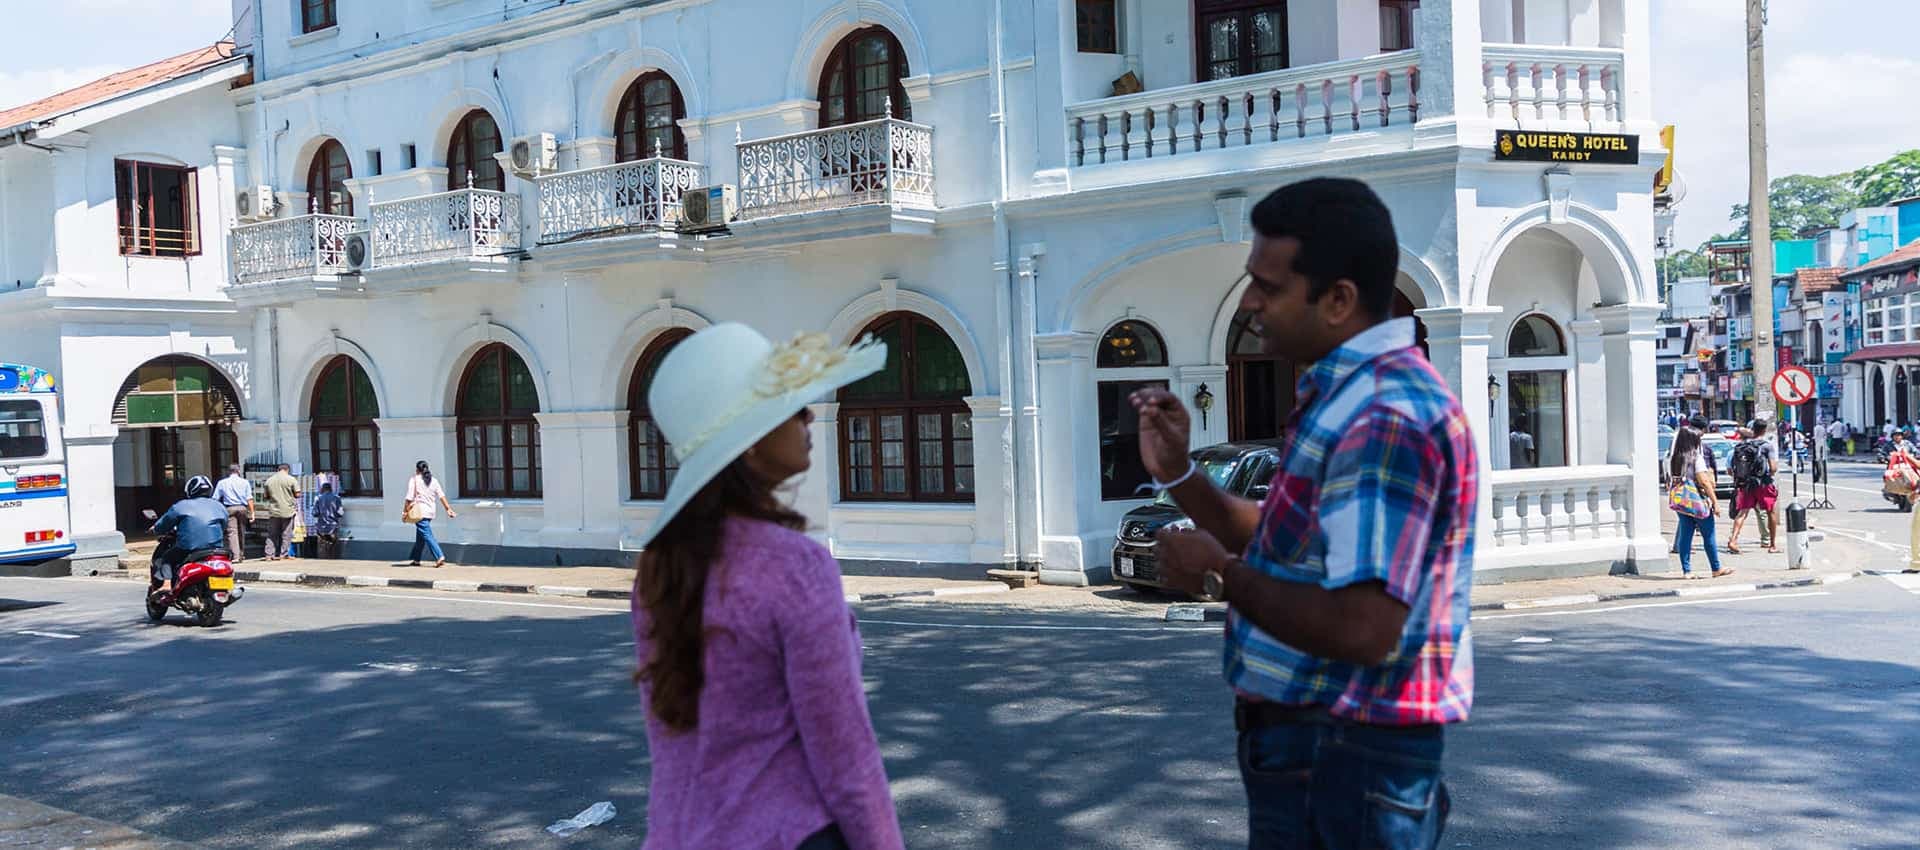 Give some explanation to the tourist in front of the Queen's hotel Sri Lanka